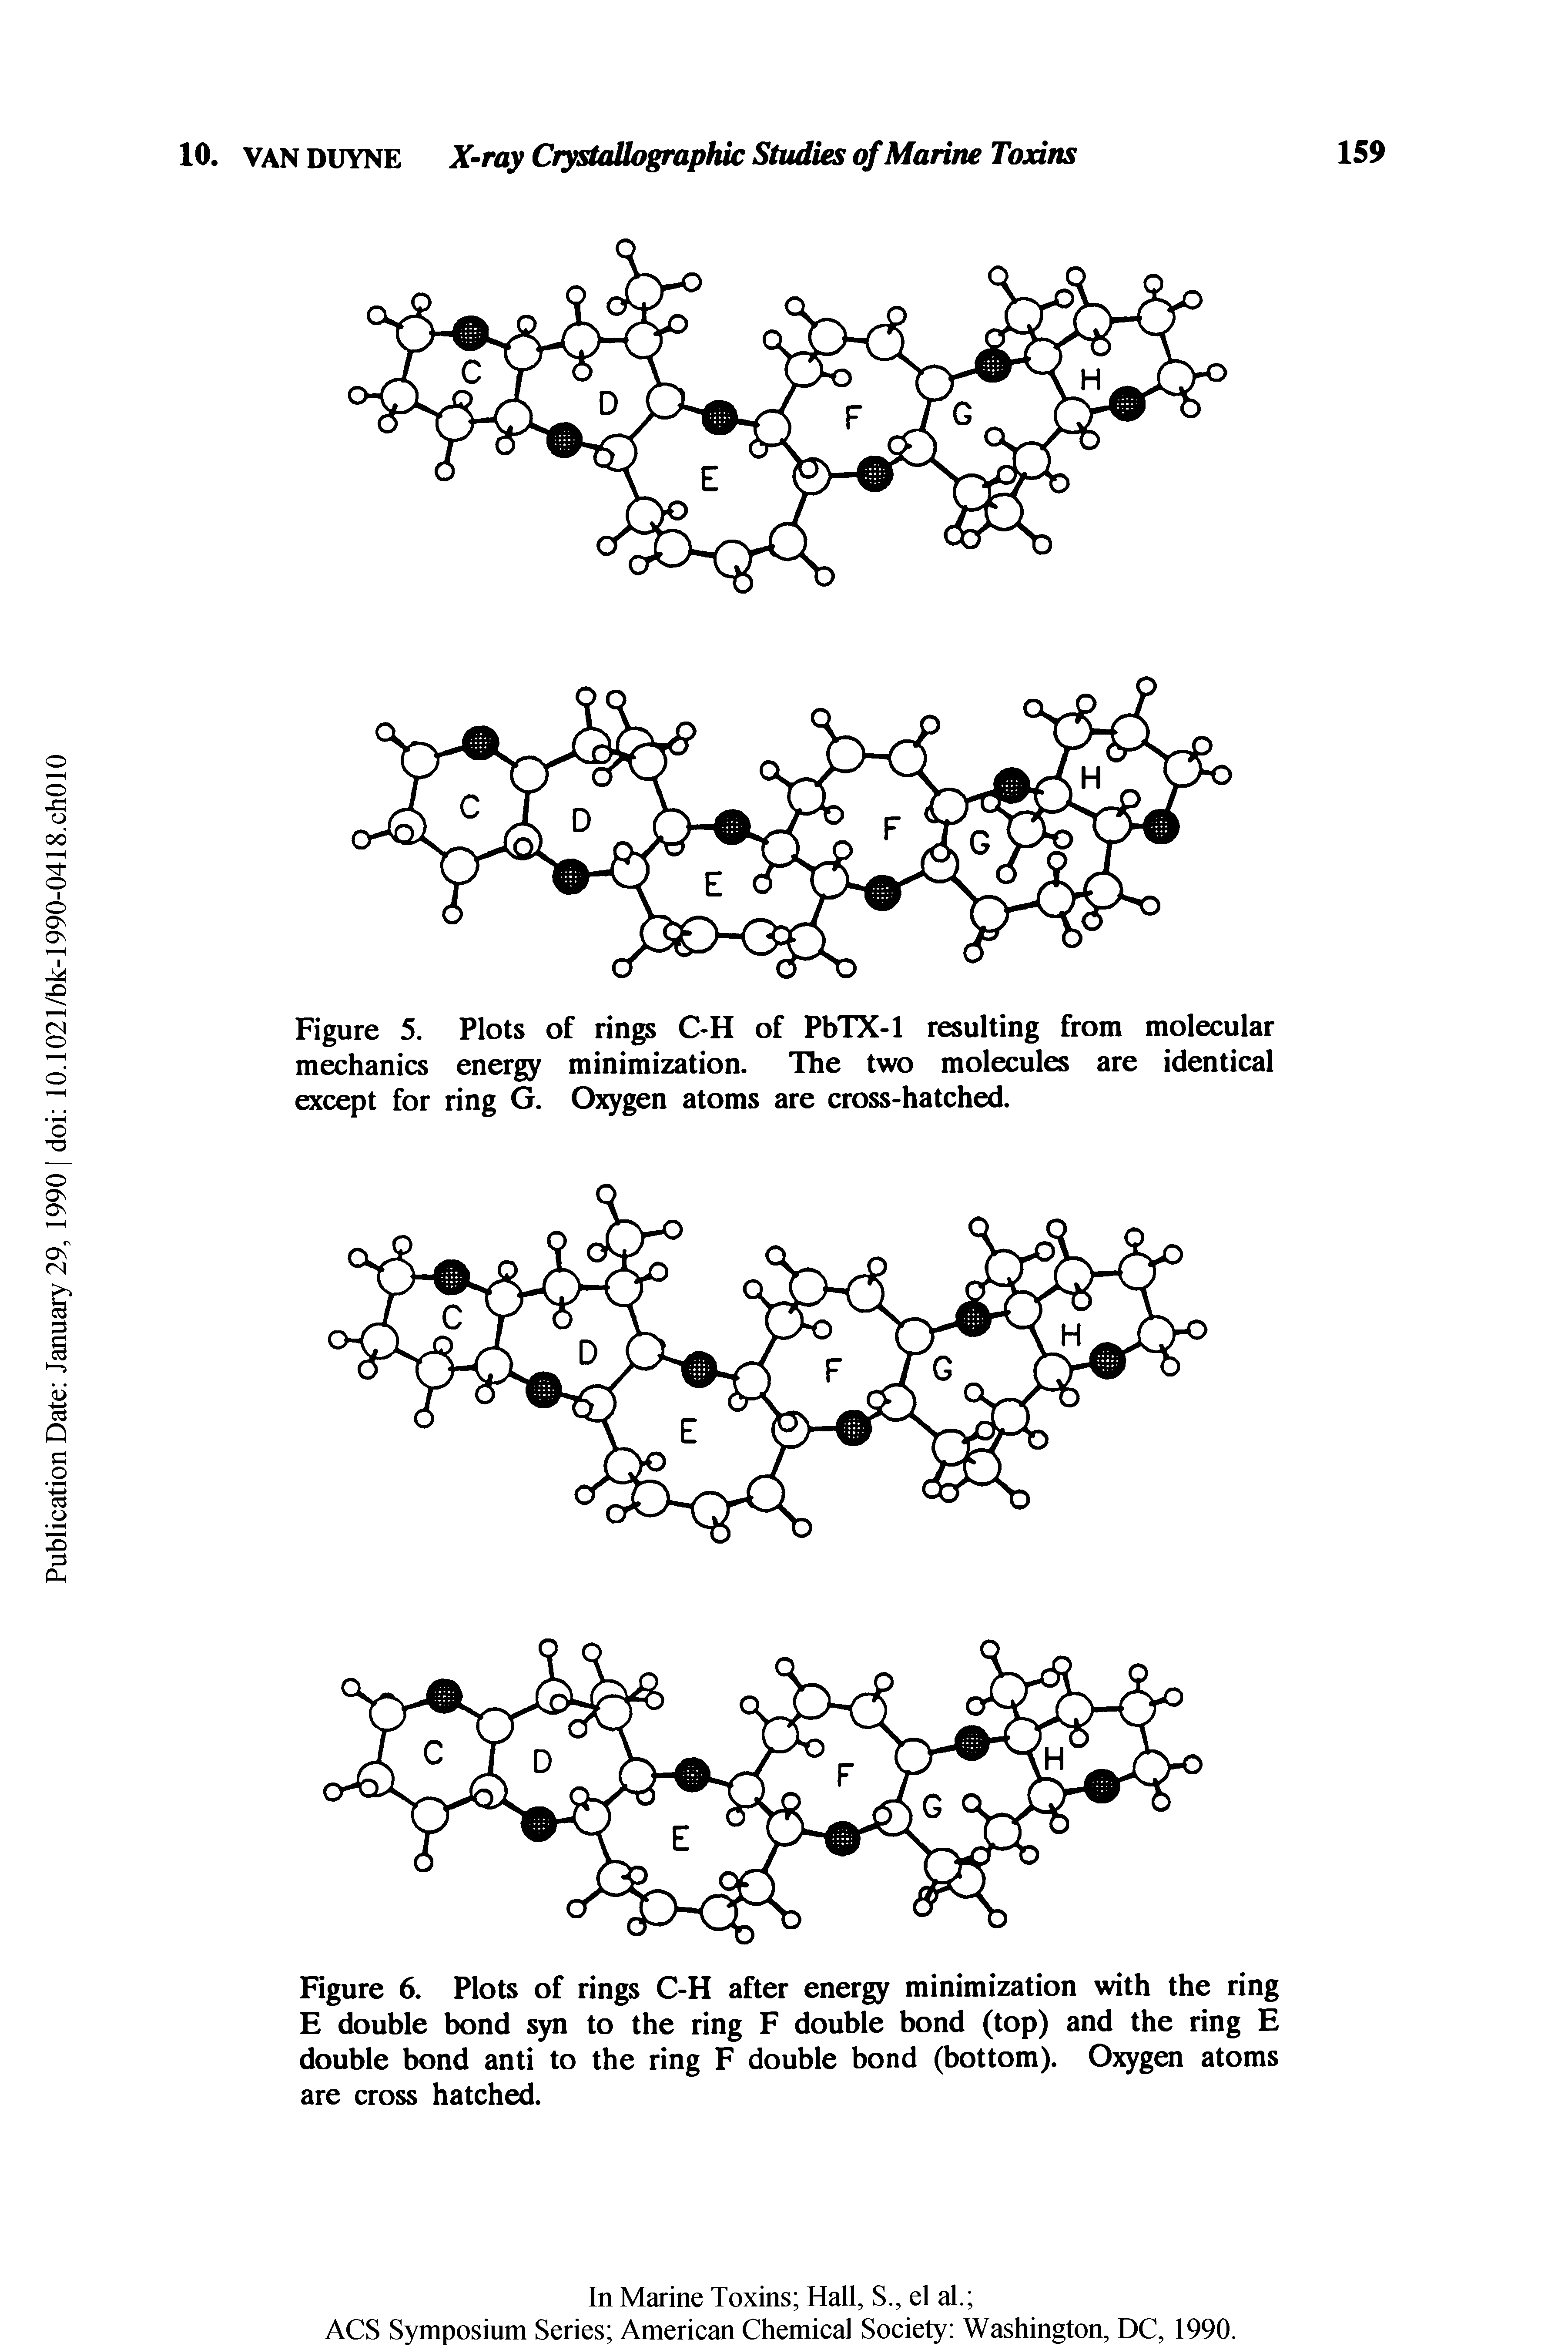 Figure 5. Plots of rings C-H of PbTX-1 resulting from molecular mechanics energy minimization. The two molecules are identical except for ring G. Oxygen atoms are cross-hatched.